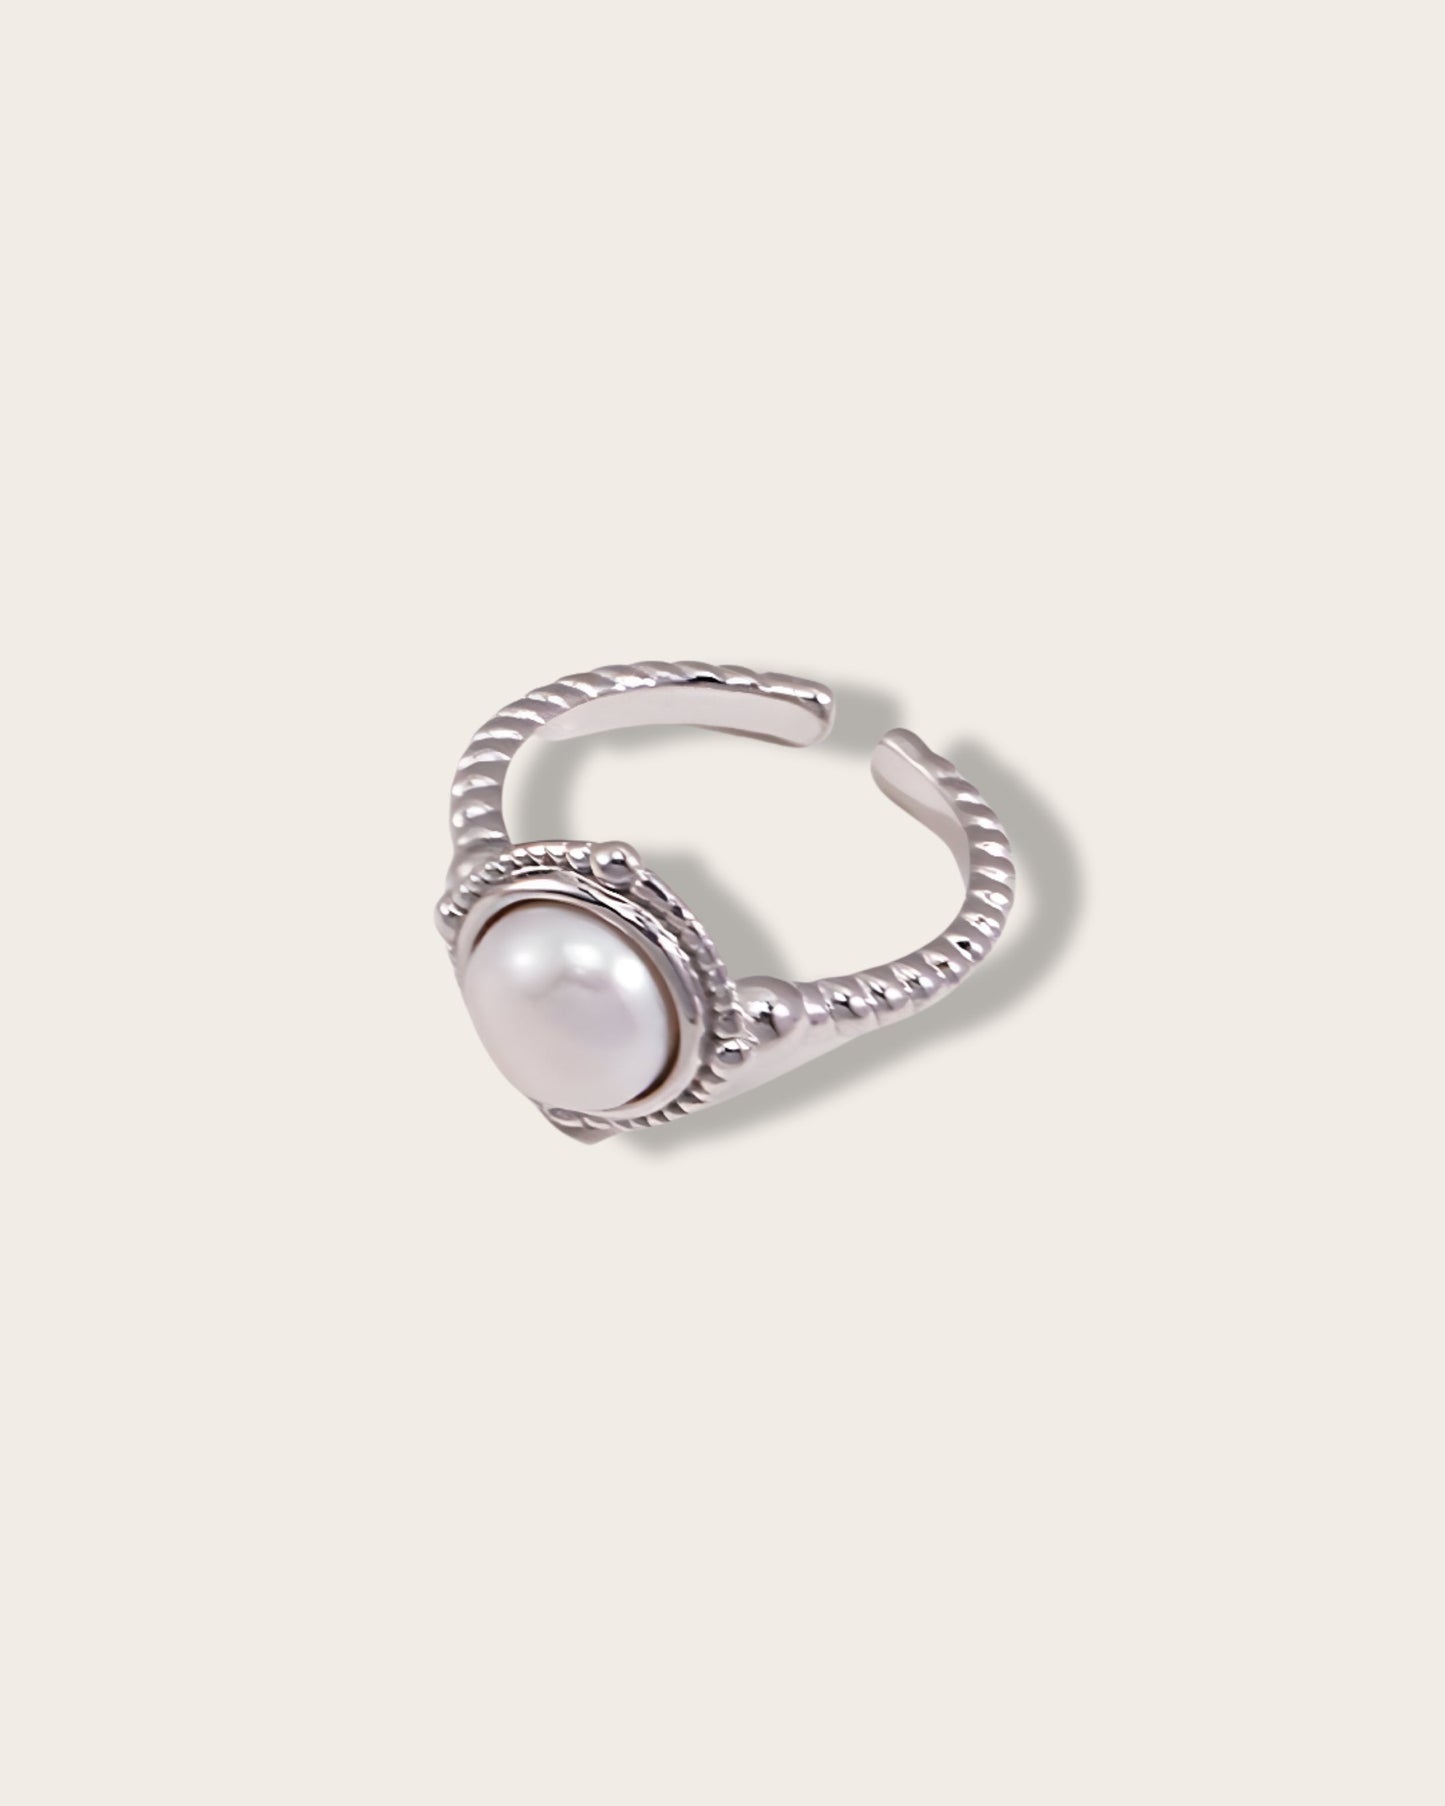 Timeless Elegance Pearl Ring - S925 Sterling Silver with 18K Gold Vermeil  - exudes vintage charm and classic design